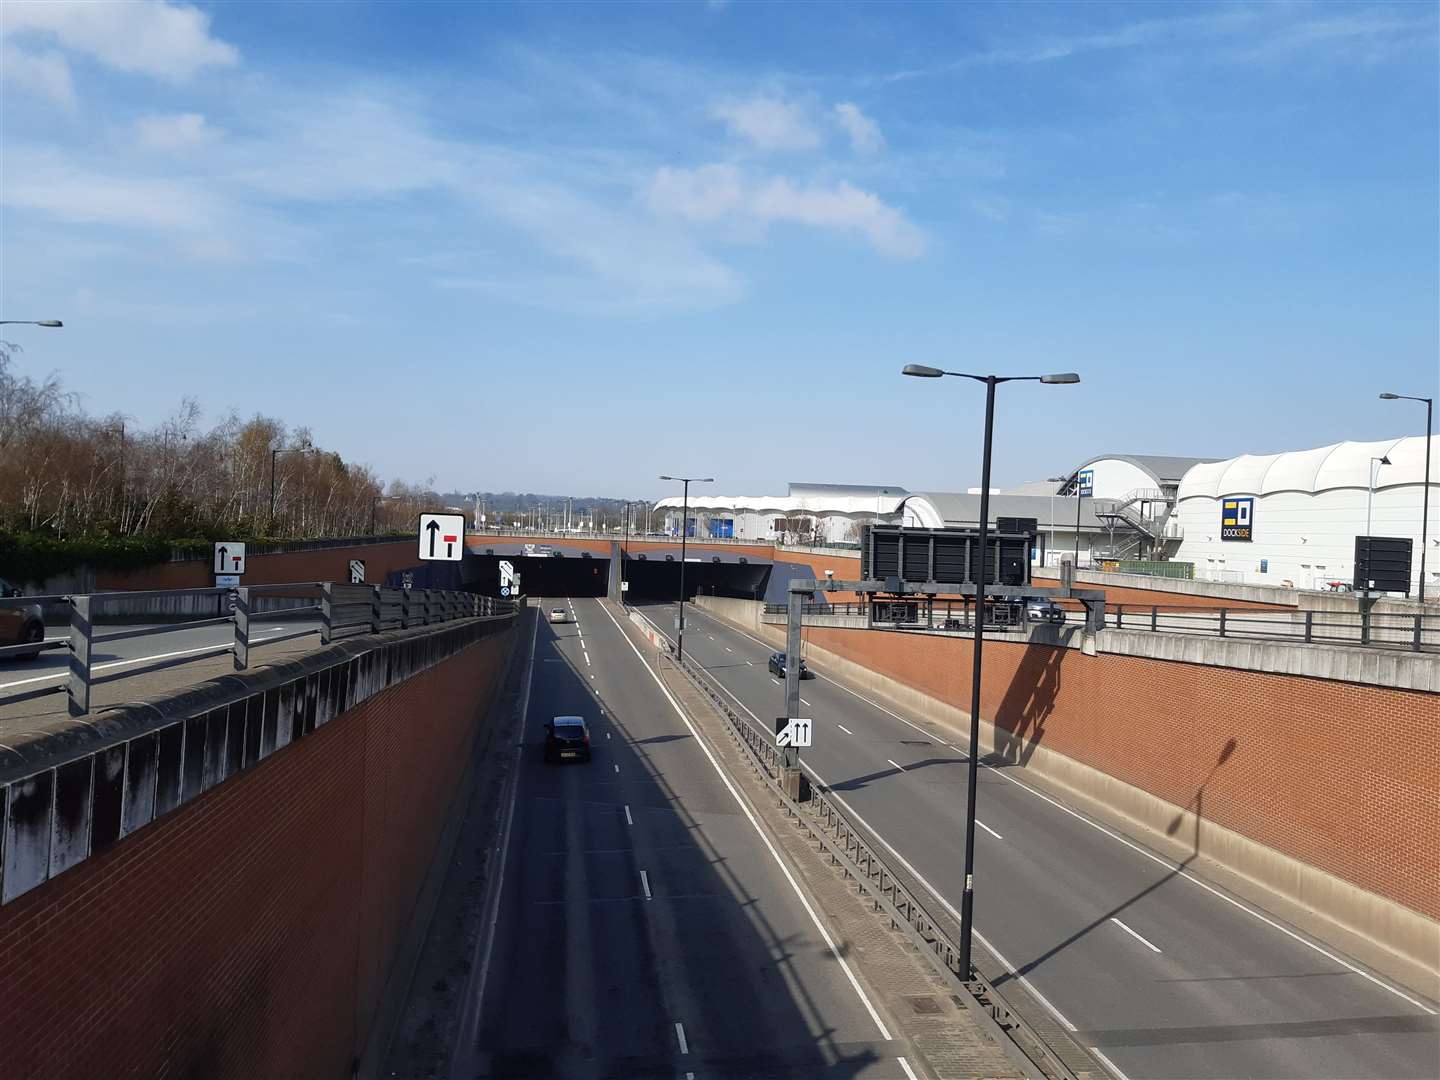 The westbound lane of the Medway Tunnel was closed this afternoon